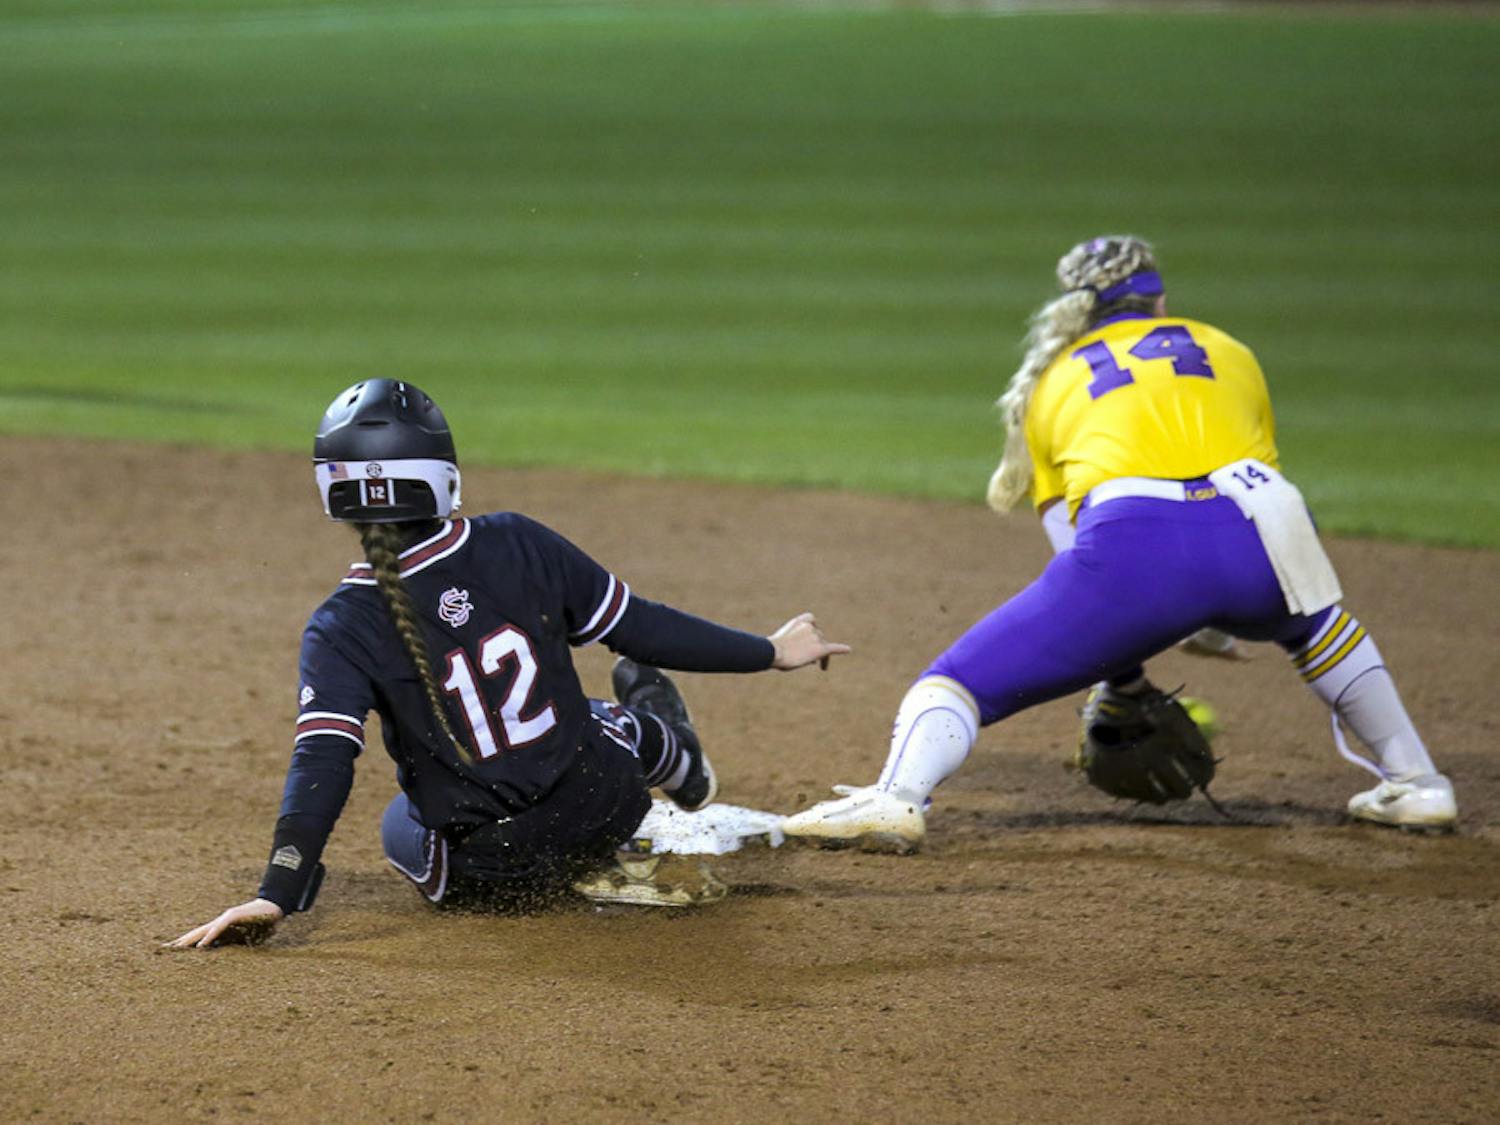 Sophomore outfielder Melissa Gonzales slides into second base during the second game of the doubleheader against LSU on March 13, 2023, at Beckham Field. The Tigers beat the Gamecocks 5-1.